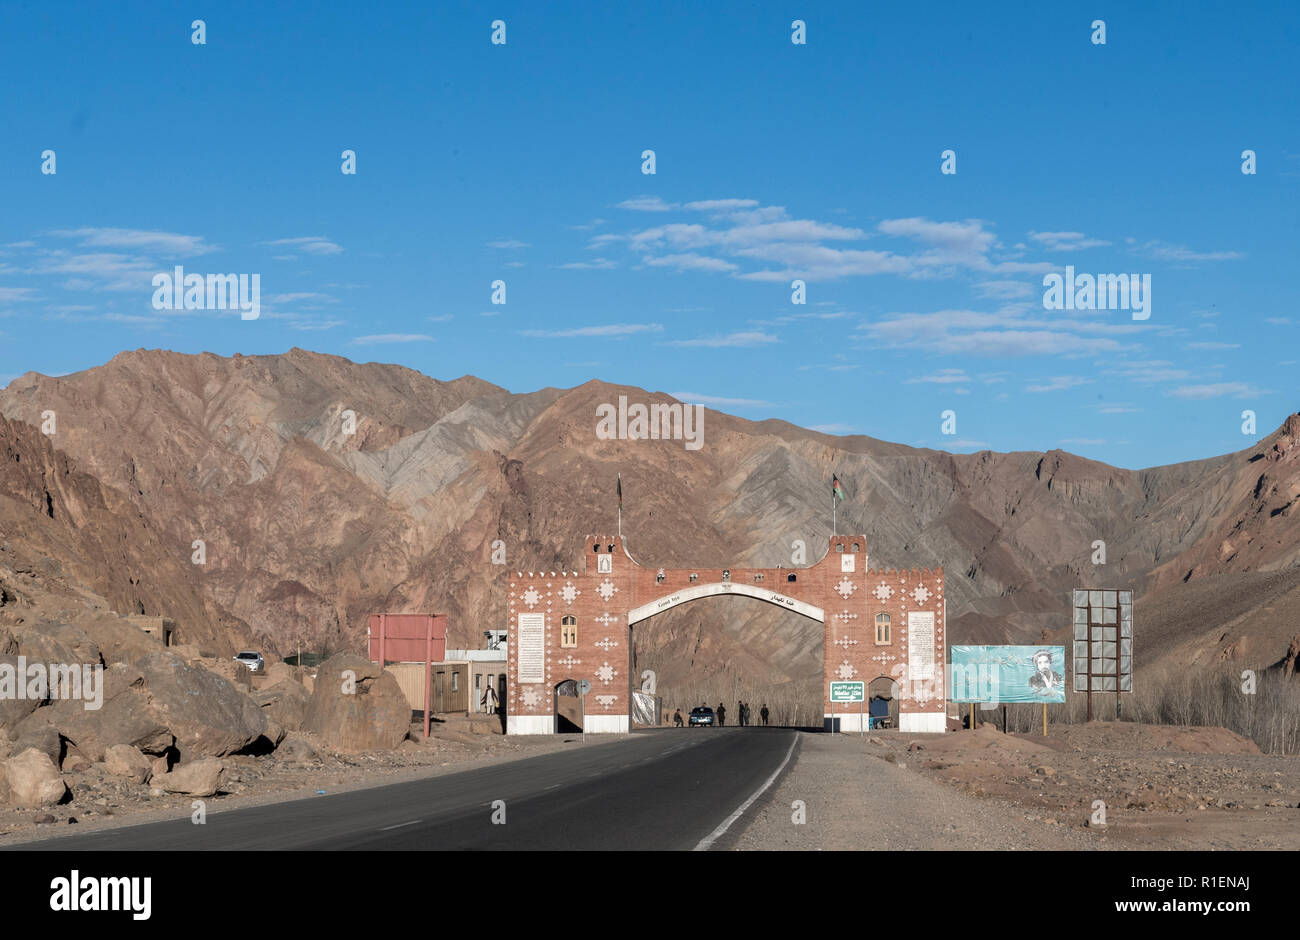 Entrance Gate To The Bamyan Valley With Police Check Point, Bamyan Province, Afghanistan Stock Photo